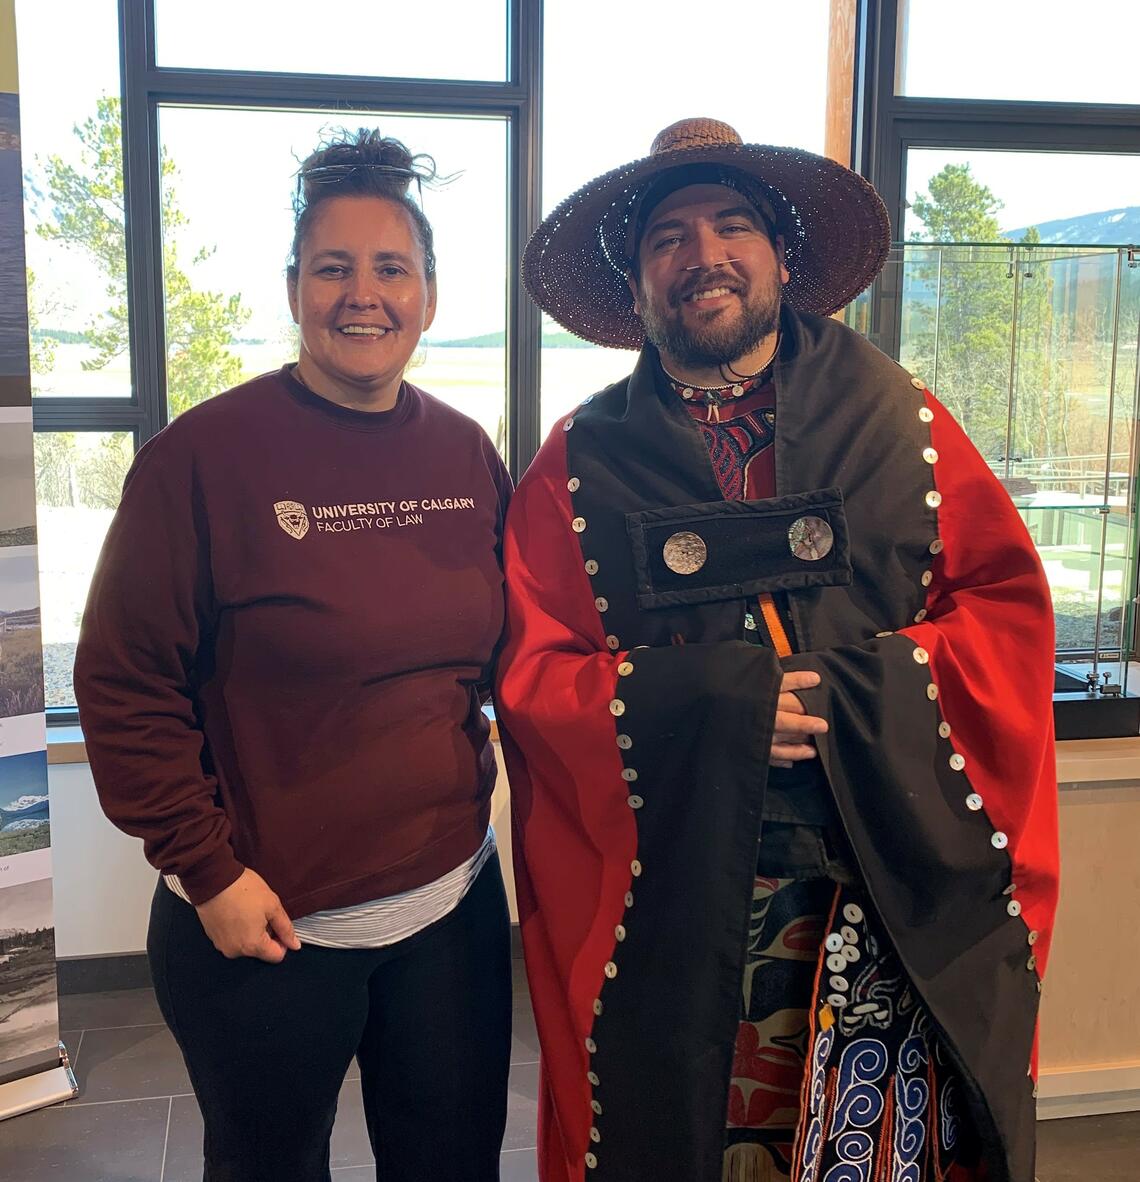 Colleen Chalifoux stands next to a man dressed in traditional Indigenous clothing during the course in the Yukon.